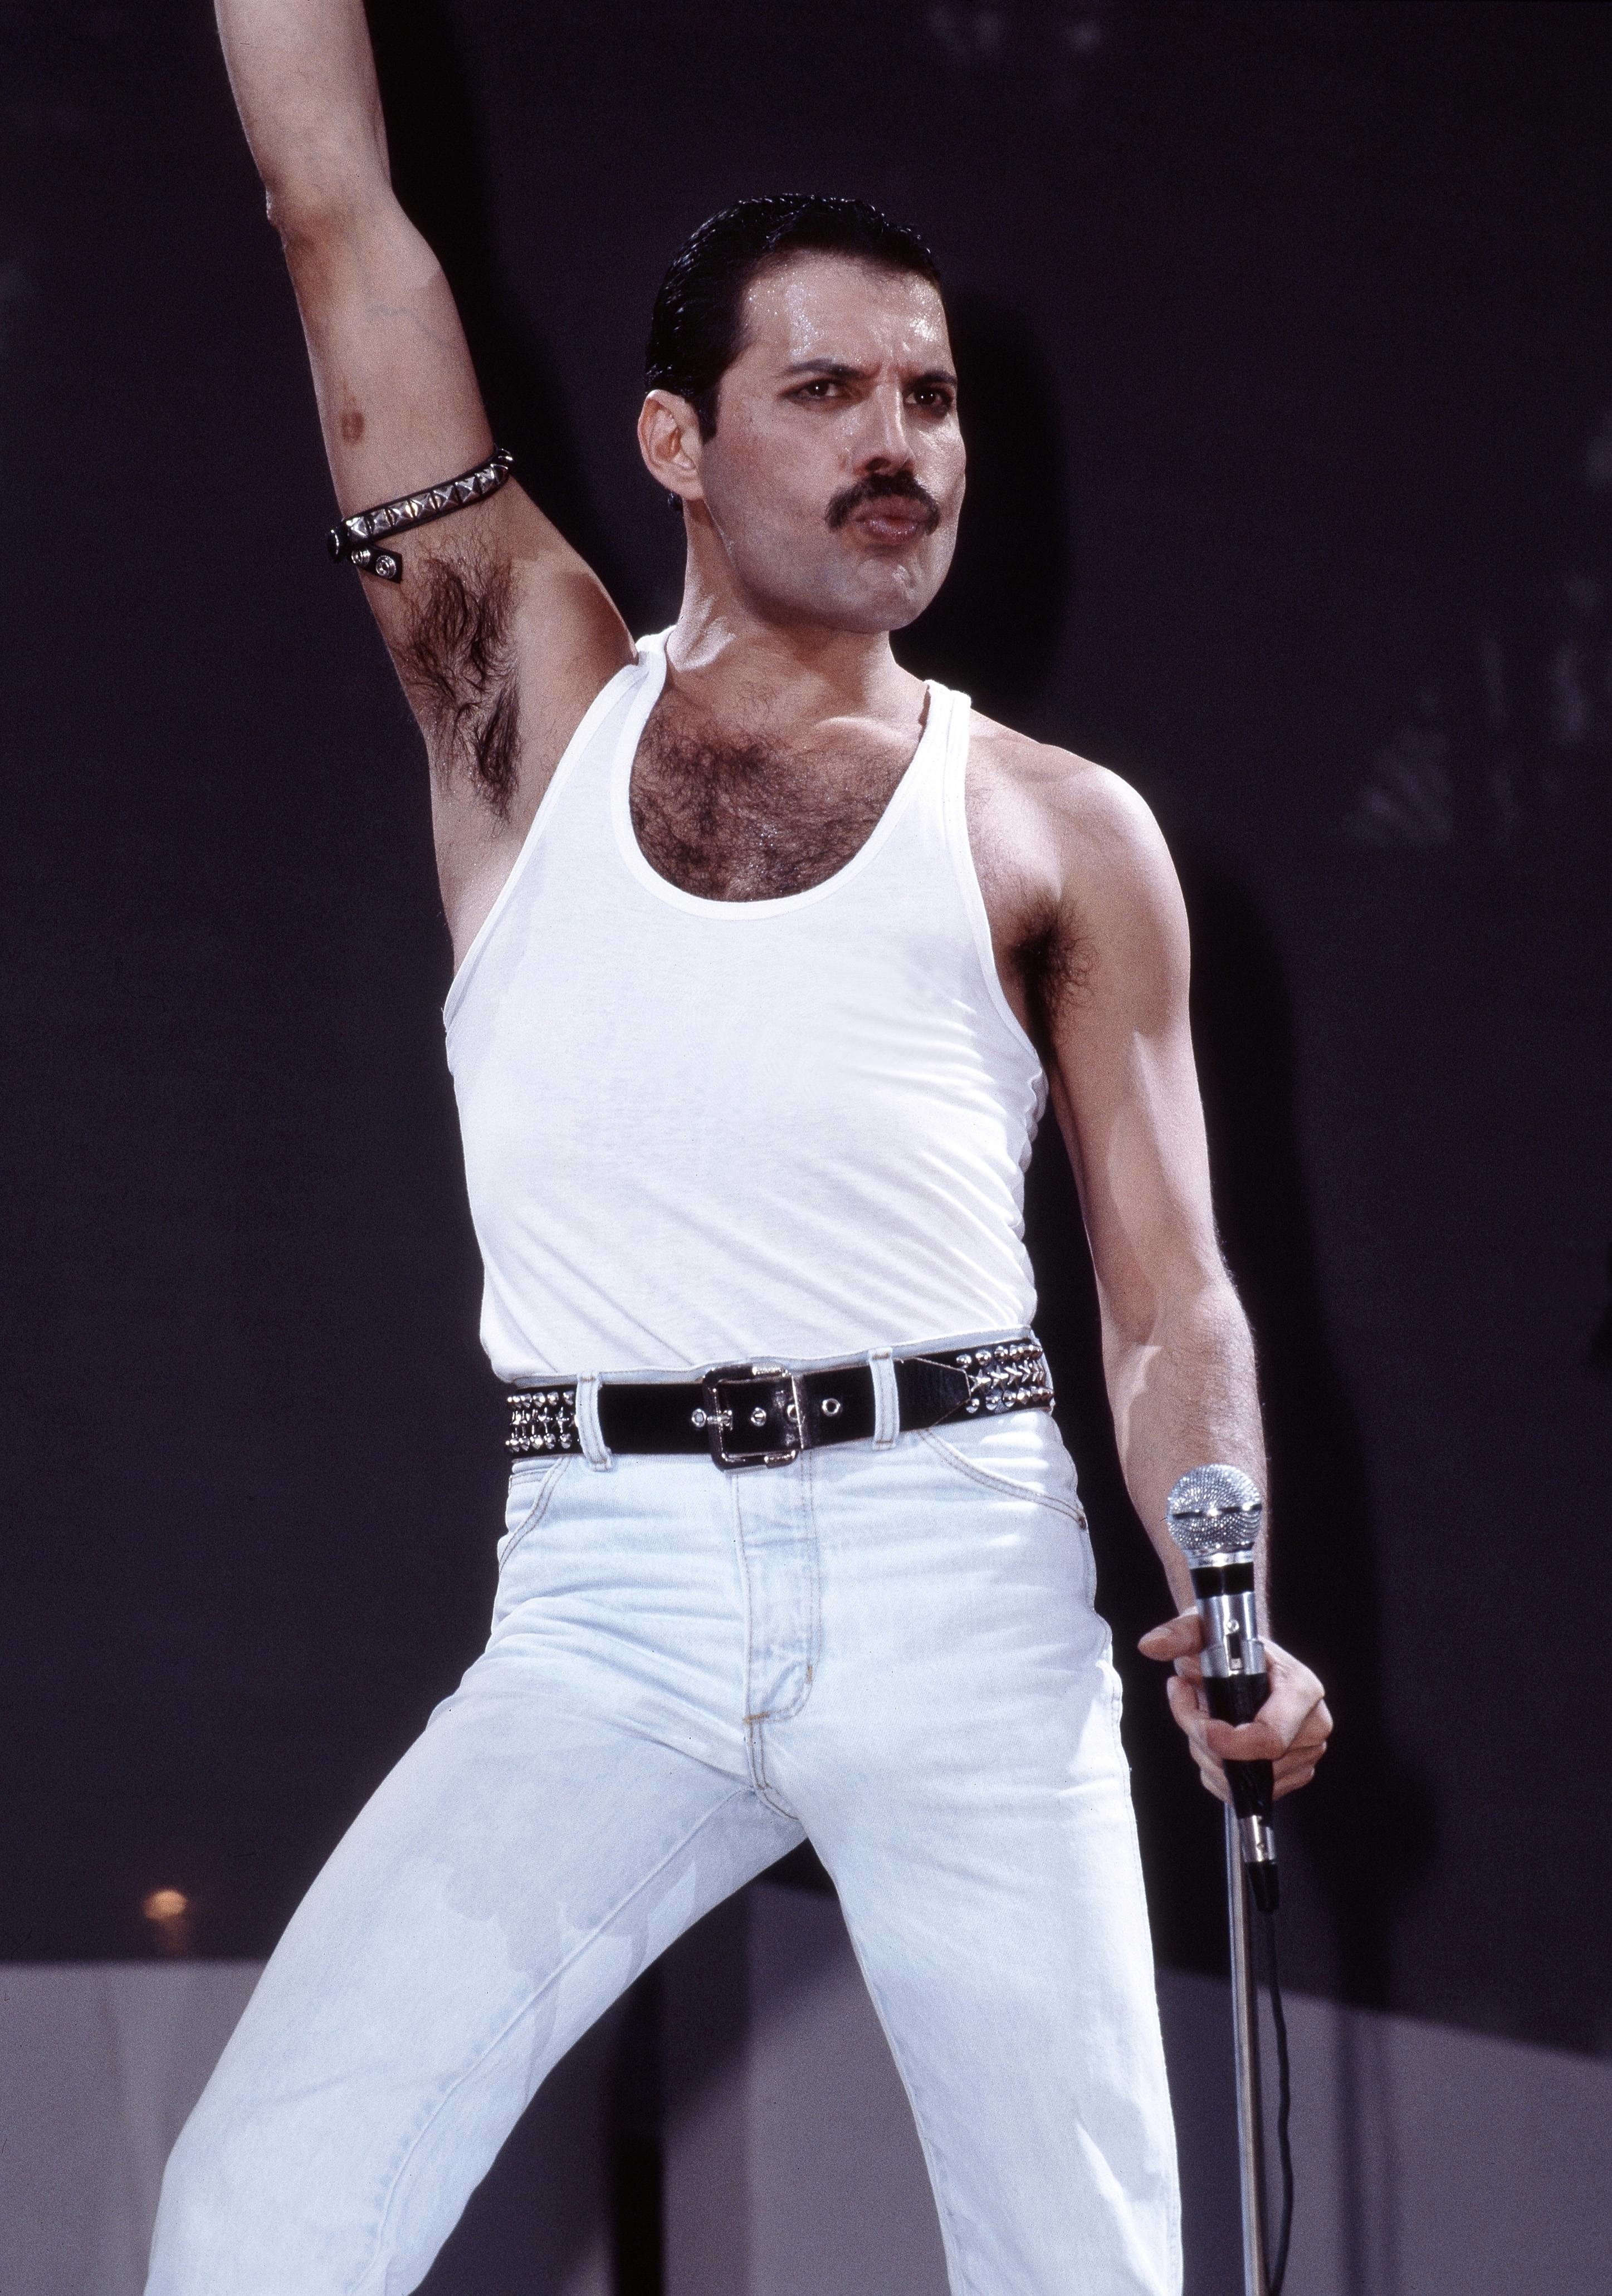 Freddie Mercury on stage in a white tank top and jeans, with one arm raised holding a mic